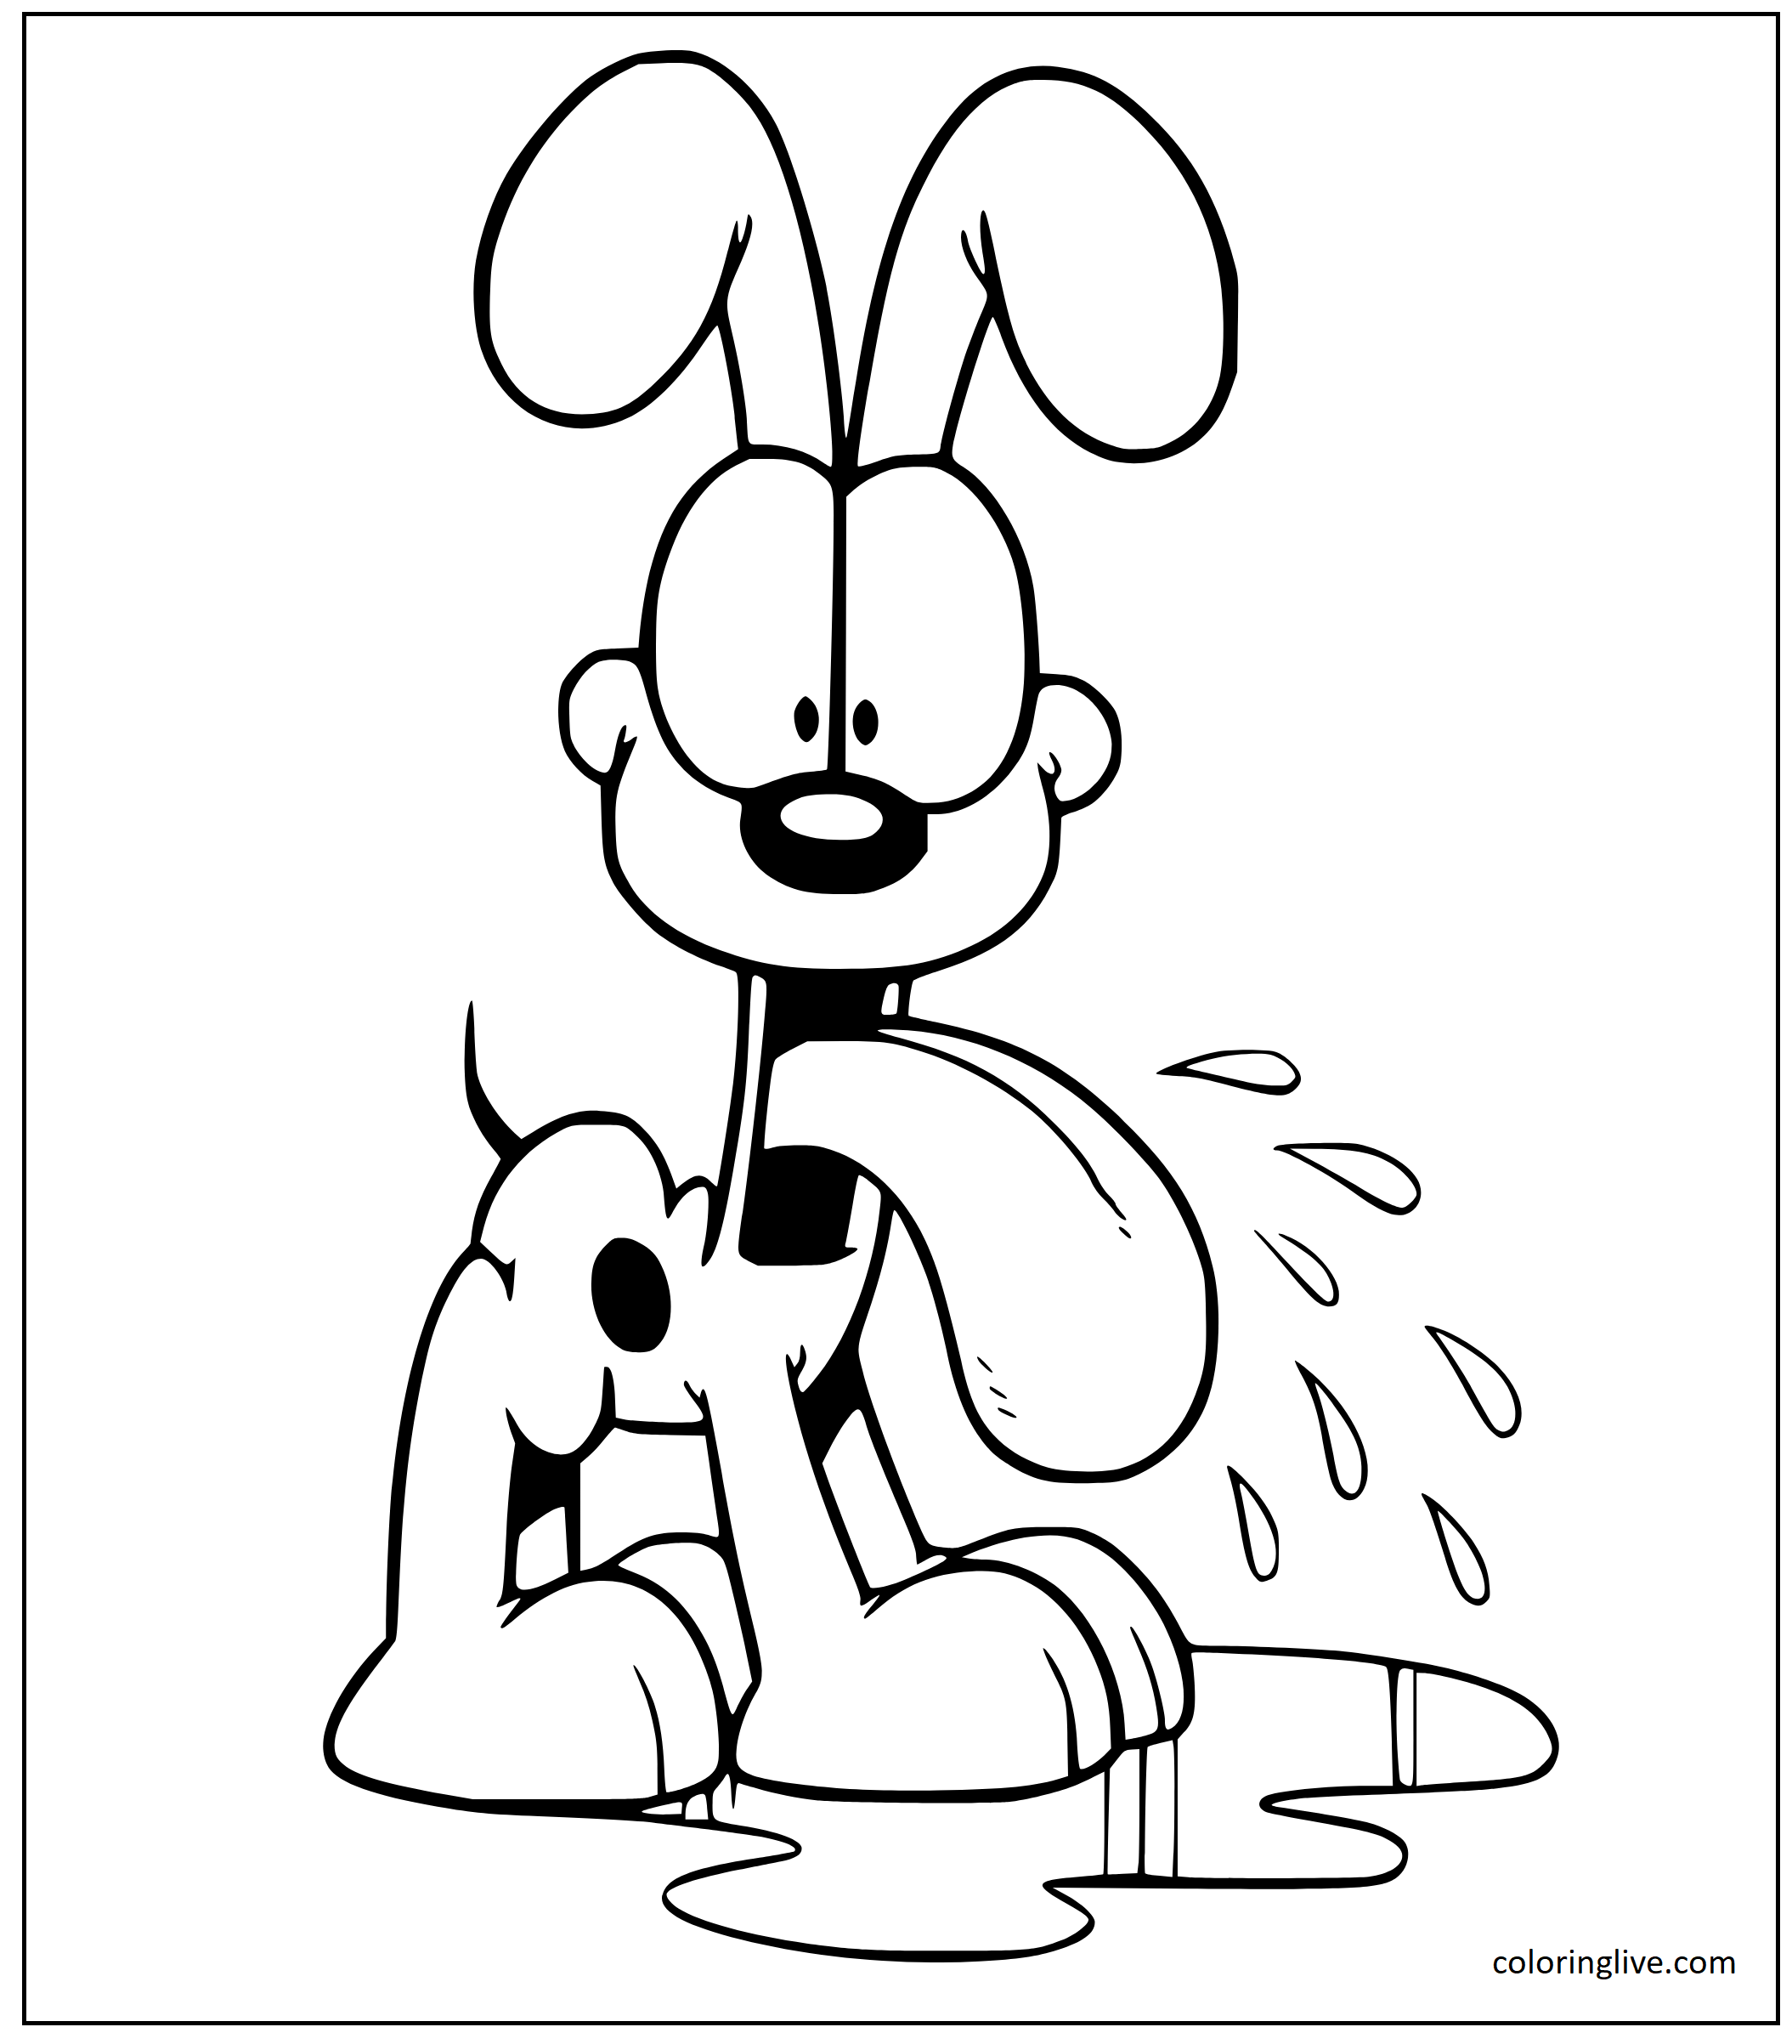 Printable Odie to color Coloring Page for kids.